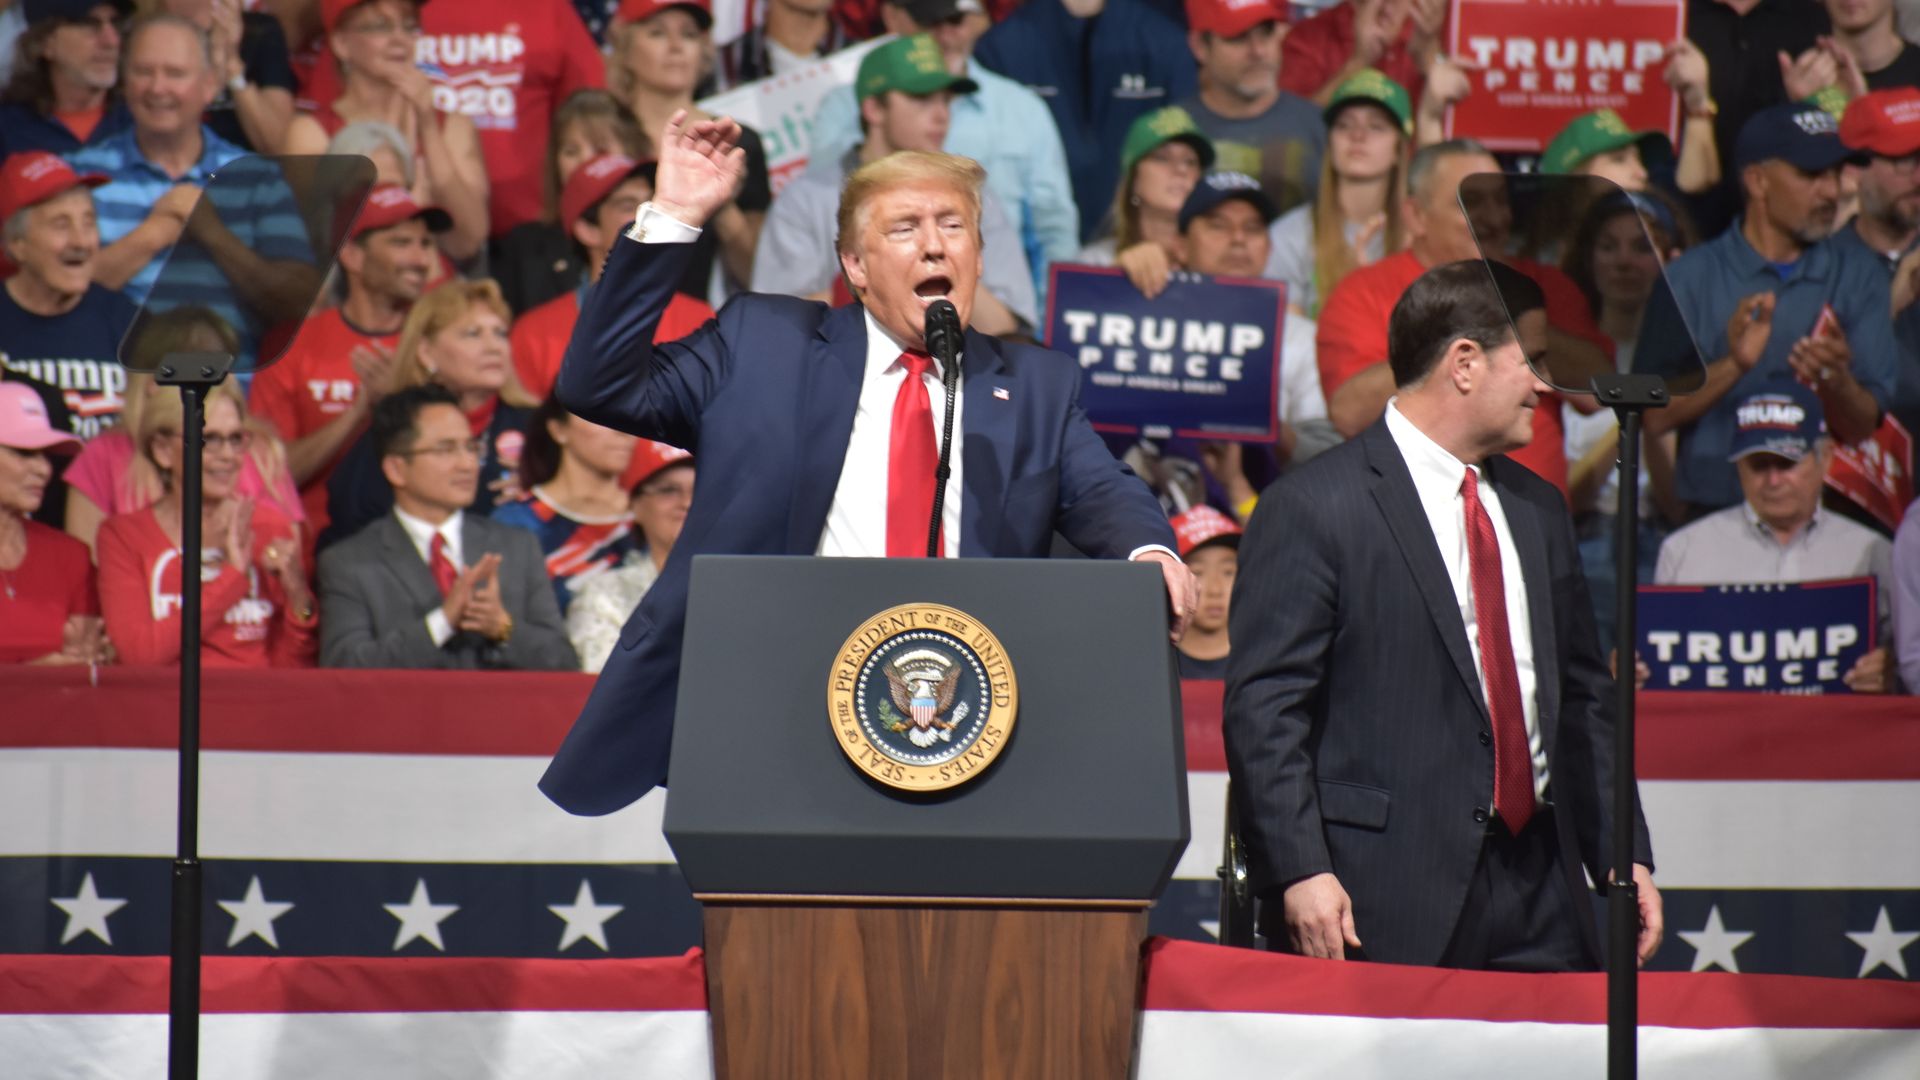 President Trump at a campaign rally